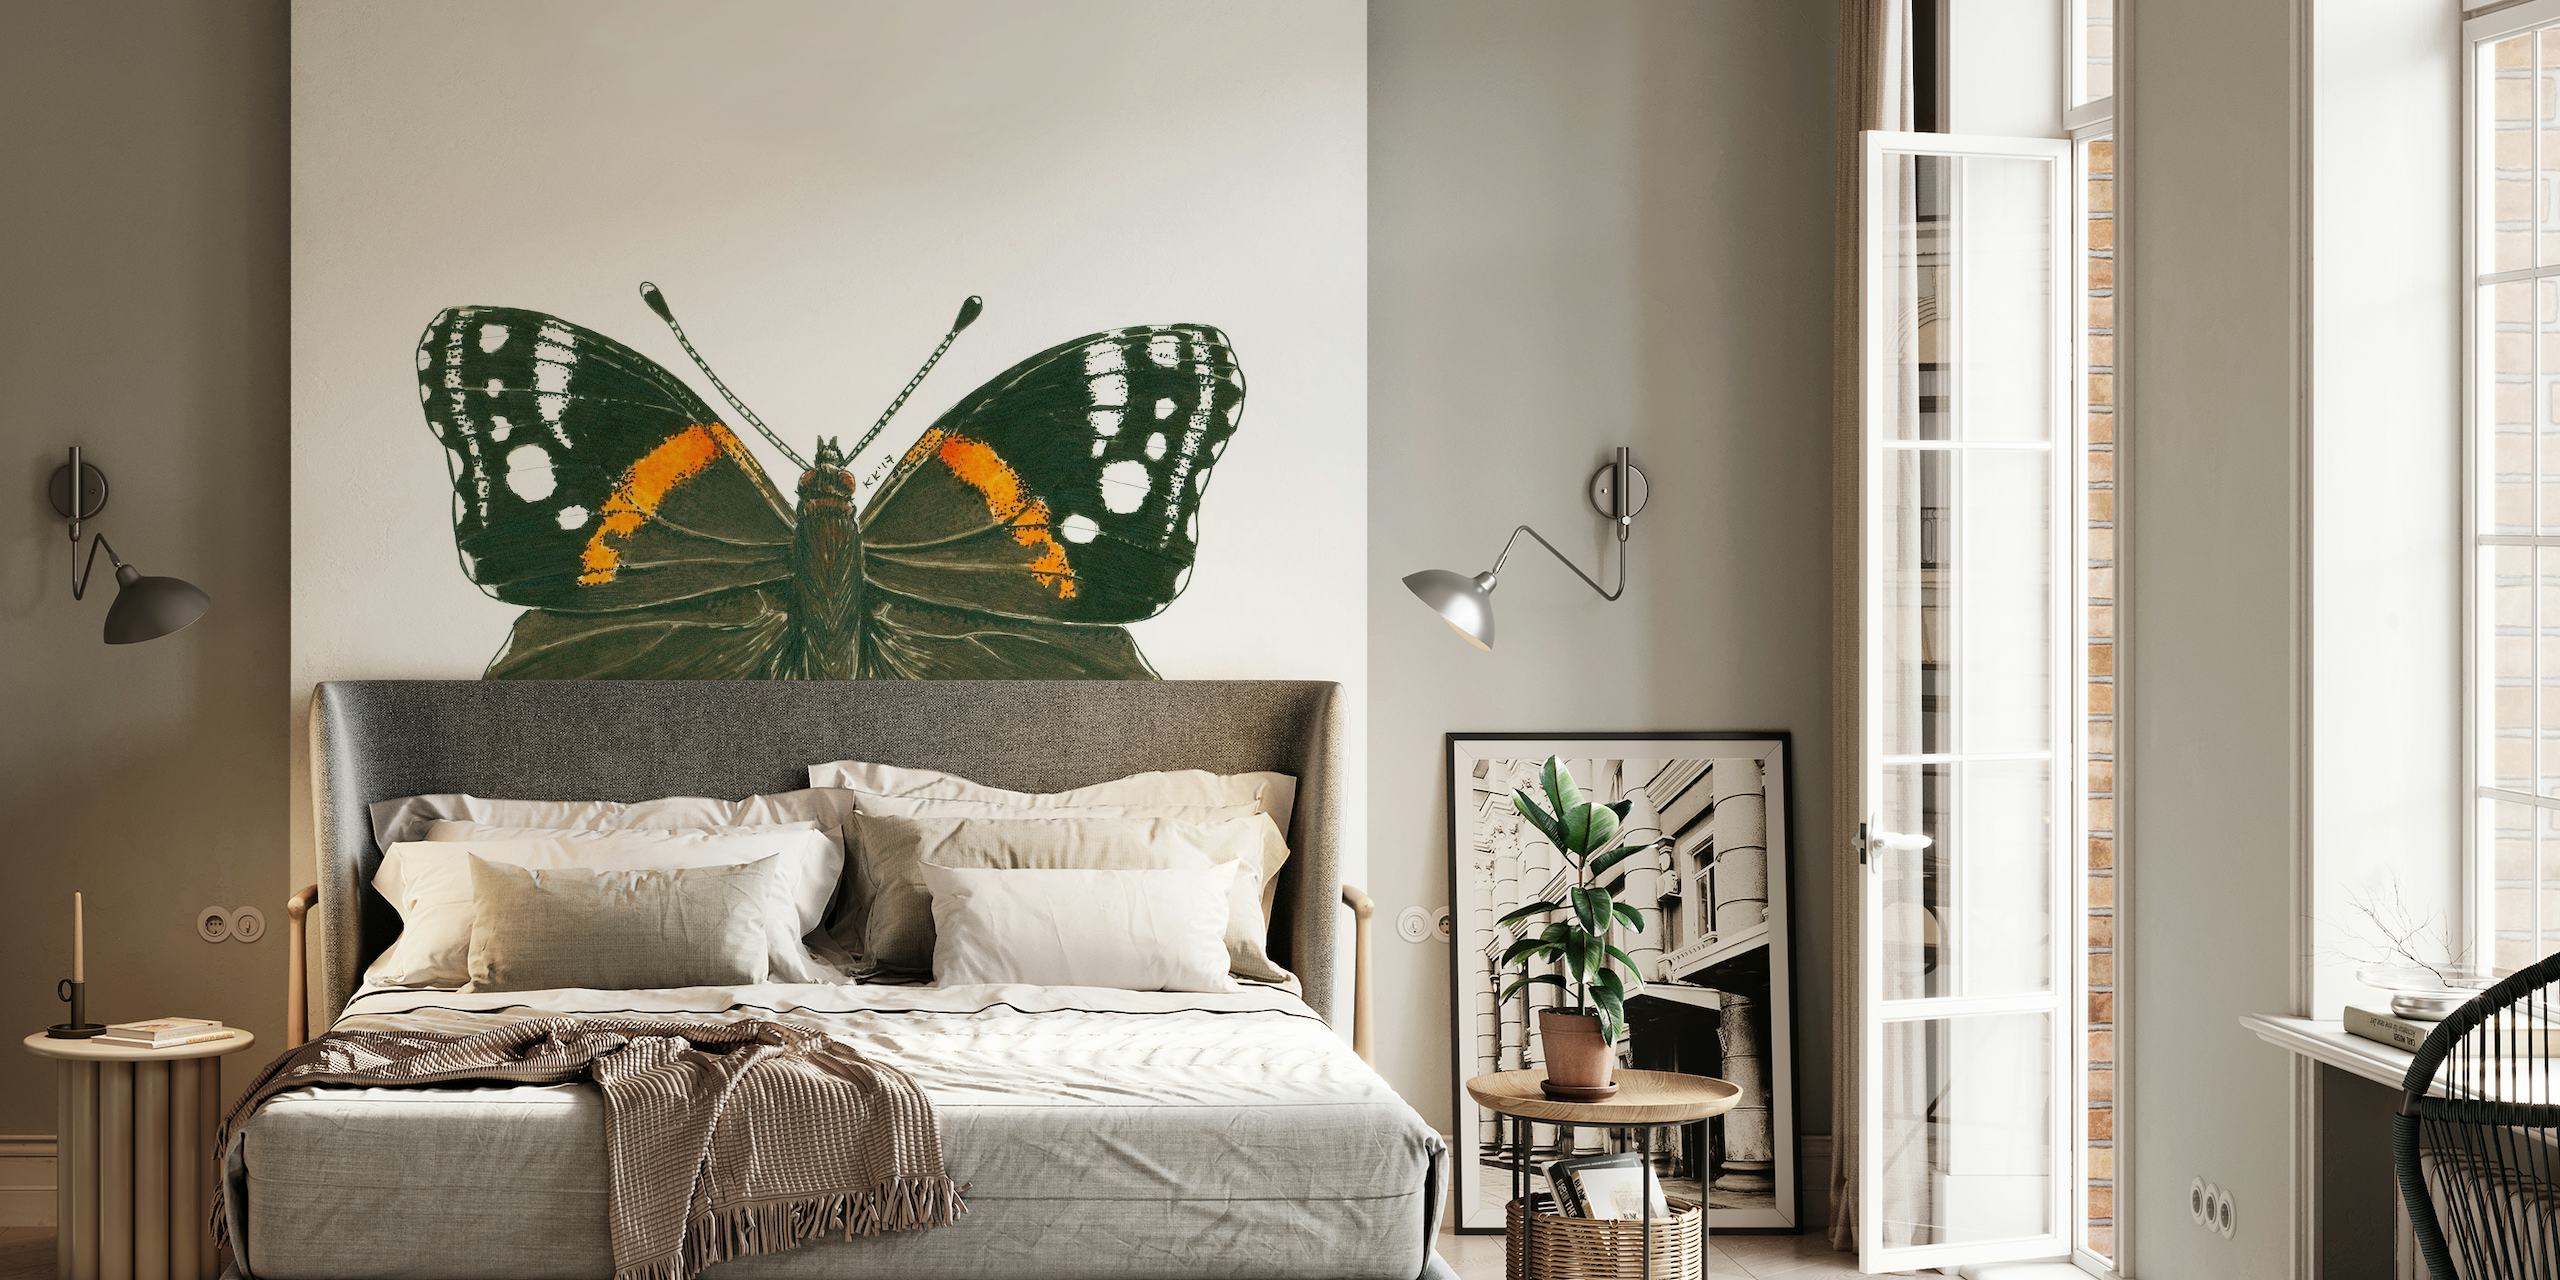 Admiral butterfly wall mural with vibrant orange and black colors